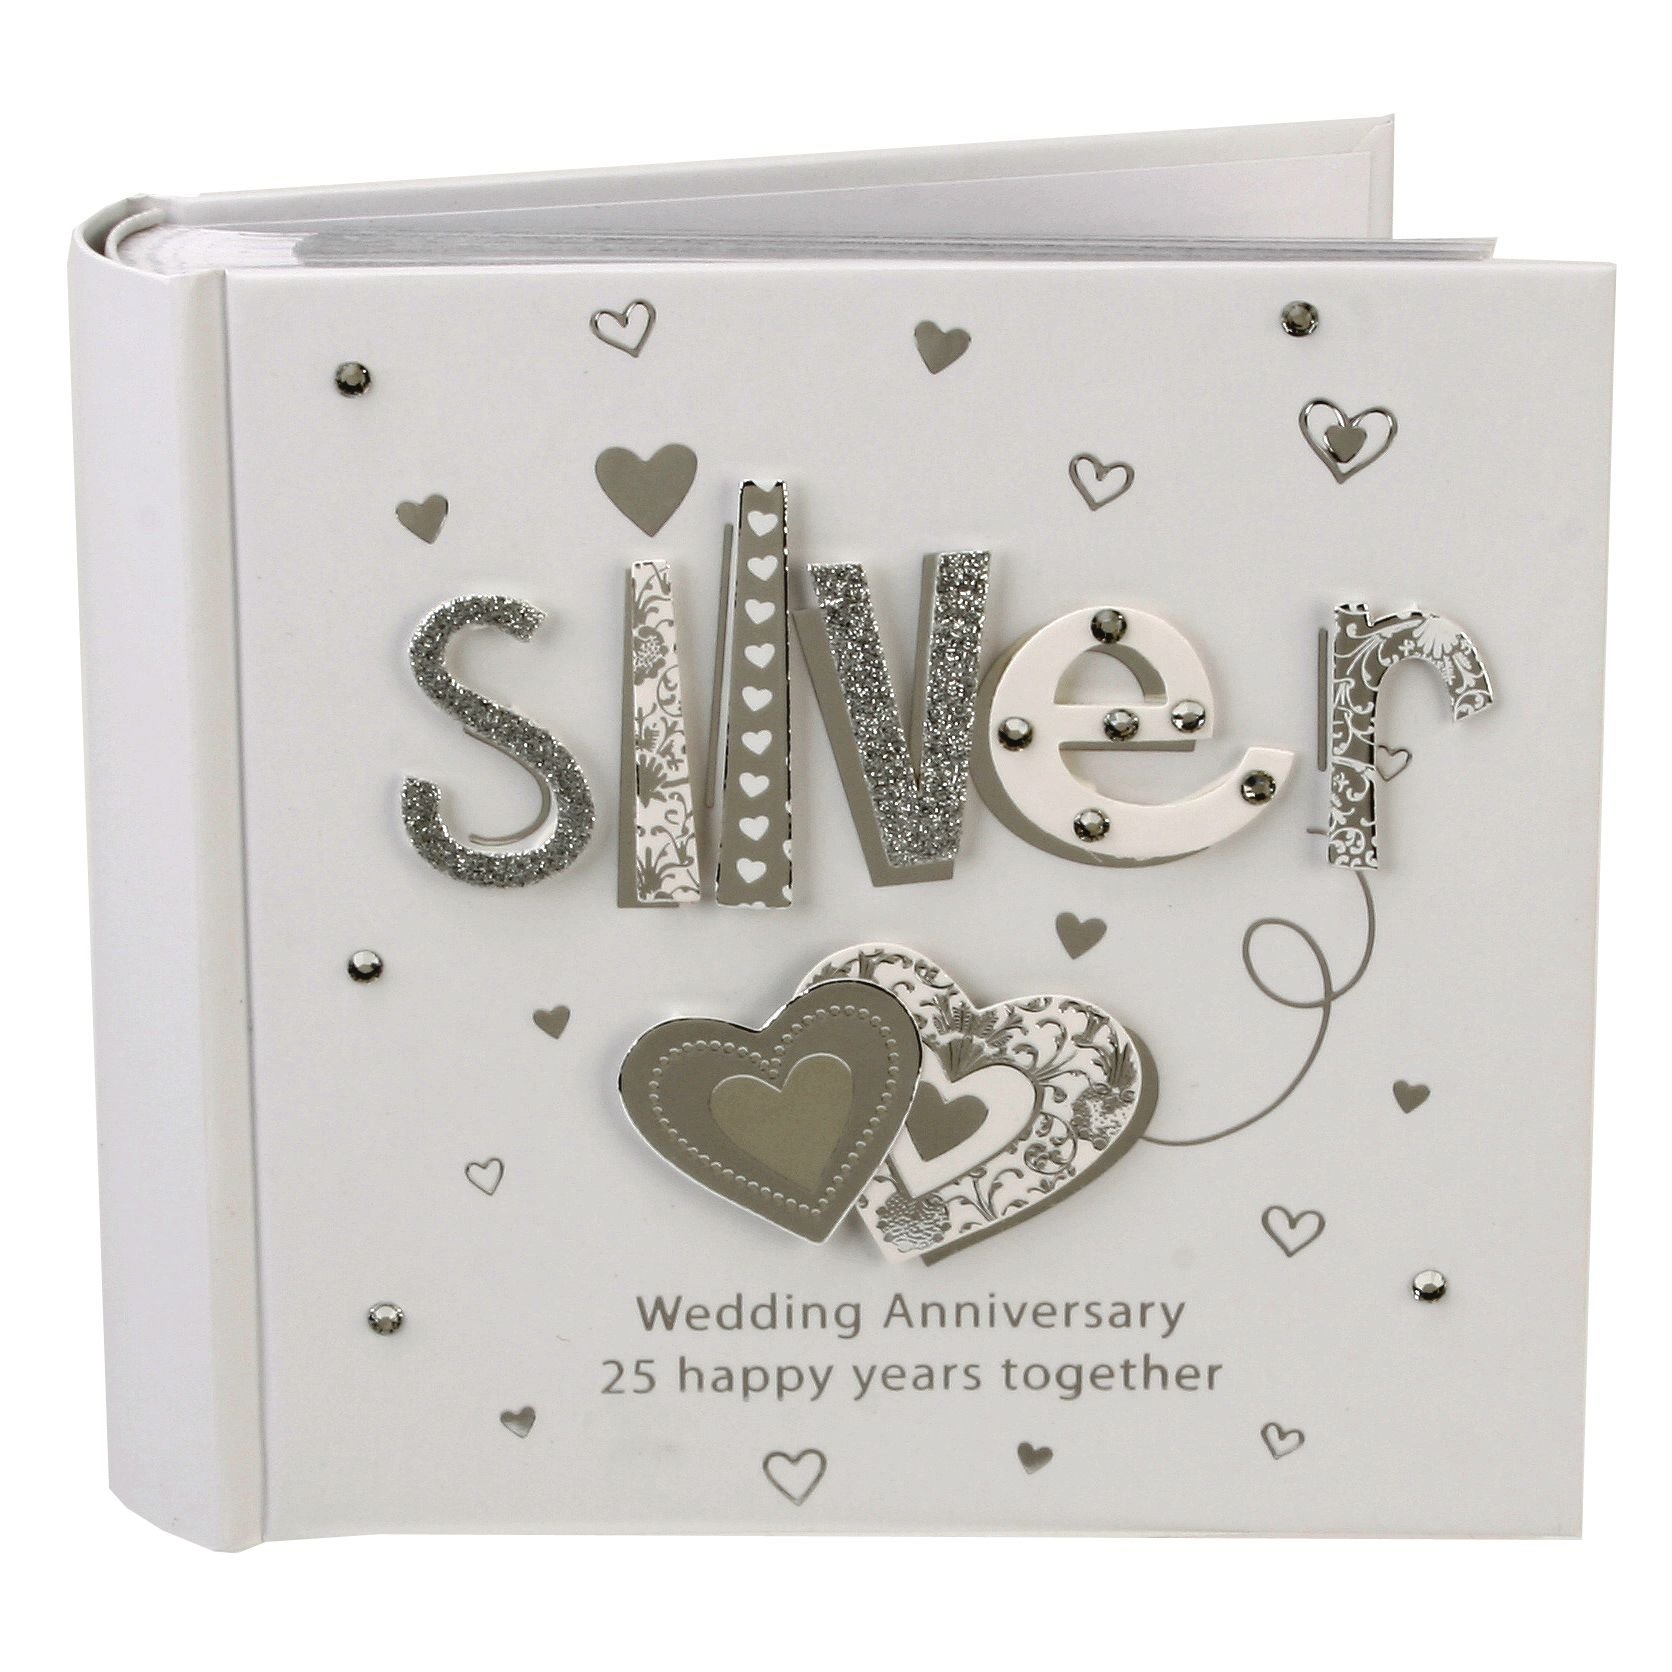 10 Stylish Gift Ideas For 25Th Anniversary wedding anniversary gifts 25th wedding anniversary gifts for parents uk 5 2022